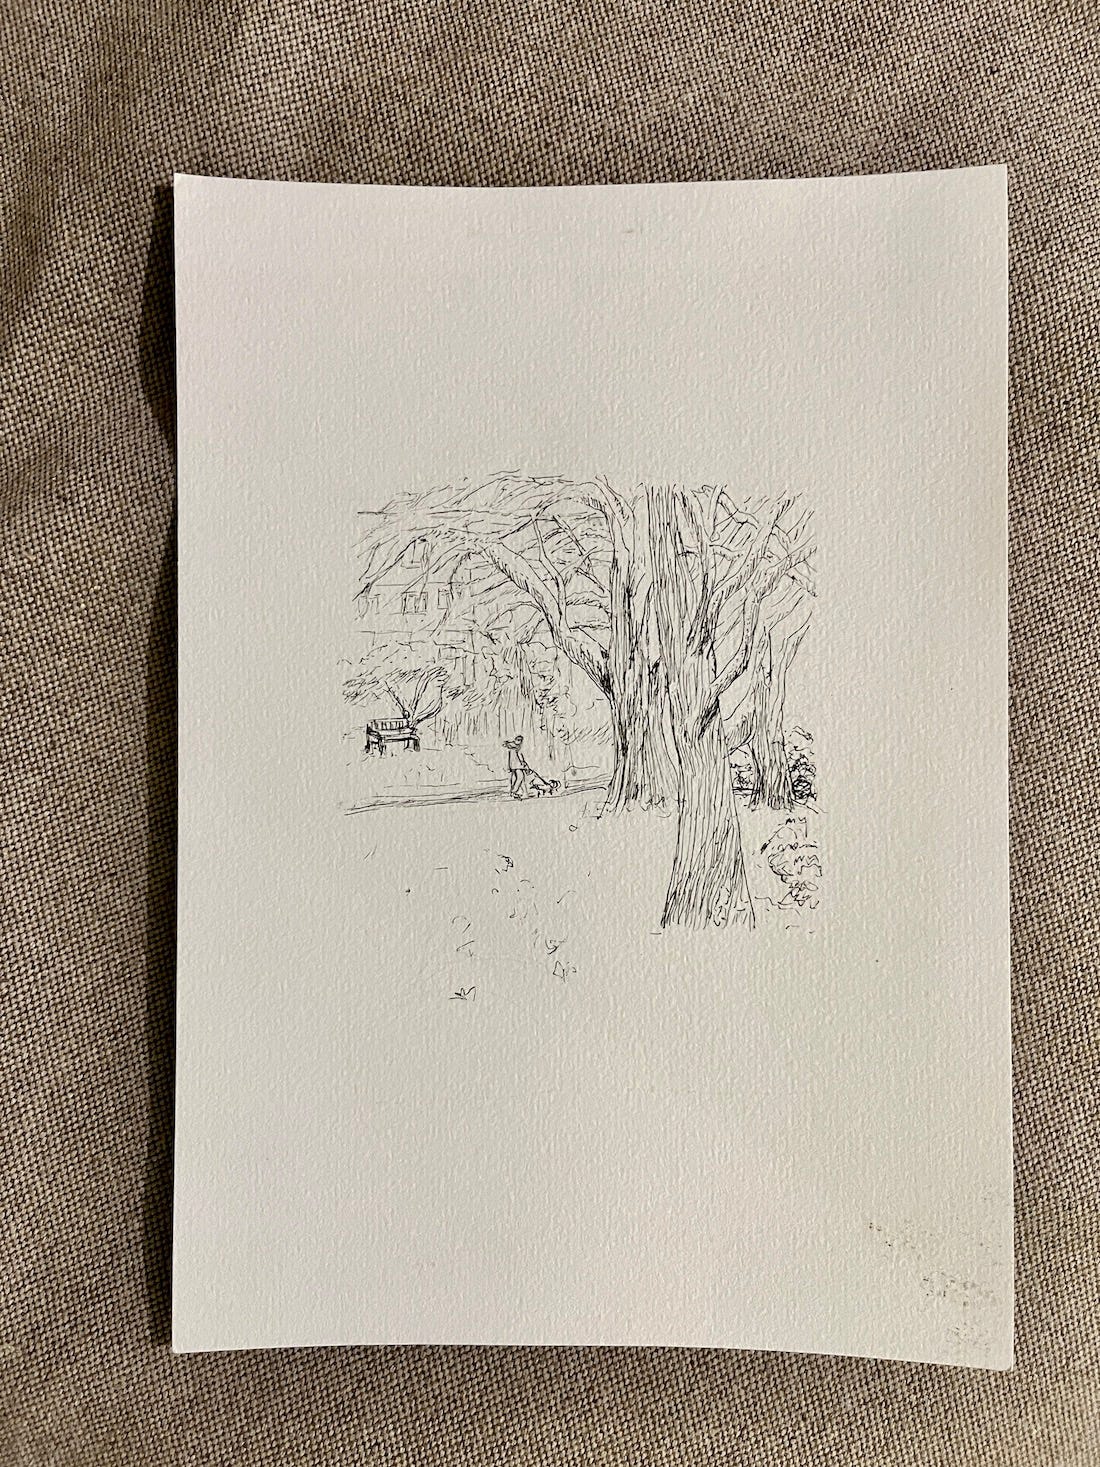 Image: Flat lay shot of a line drawing of a snowy, wintry scene at a park in London. The trees are seen in the middle ground and foreground, with their branches covered in snow. In the background, a man wearing a winter jacket is walking his dog.